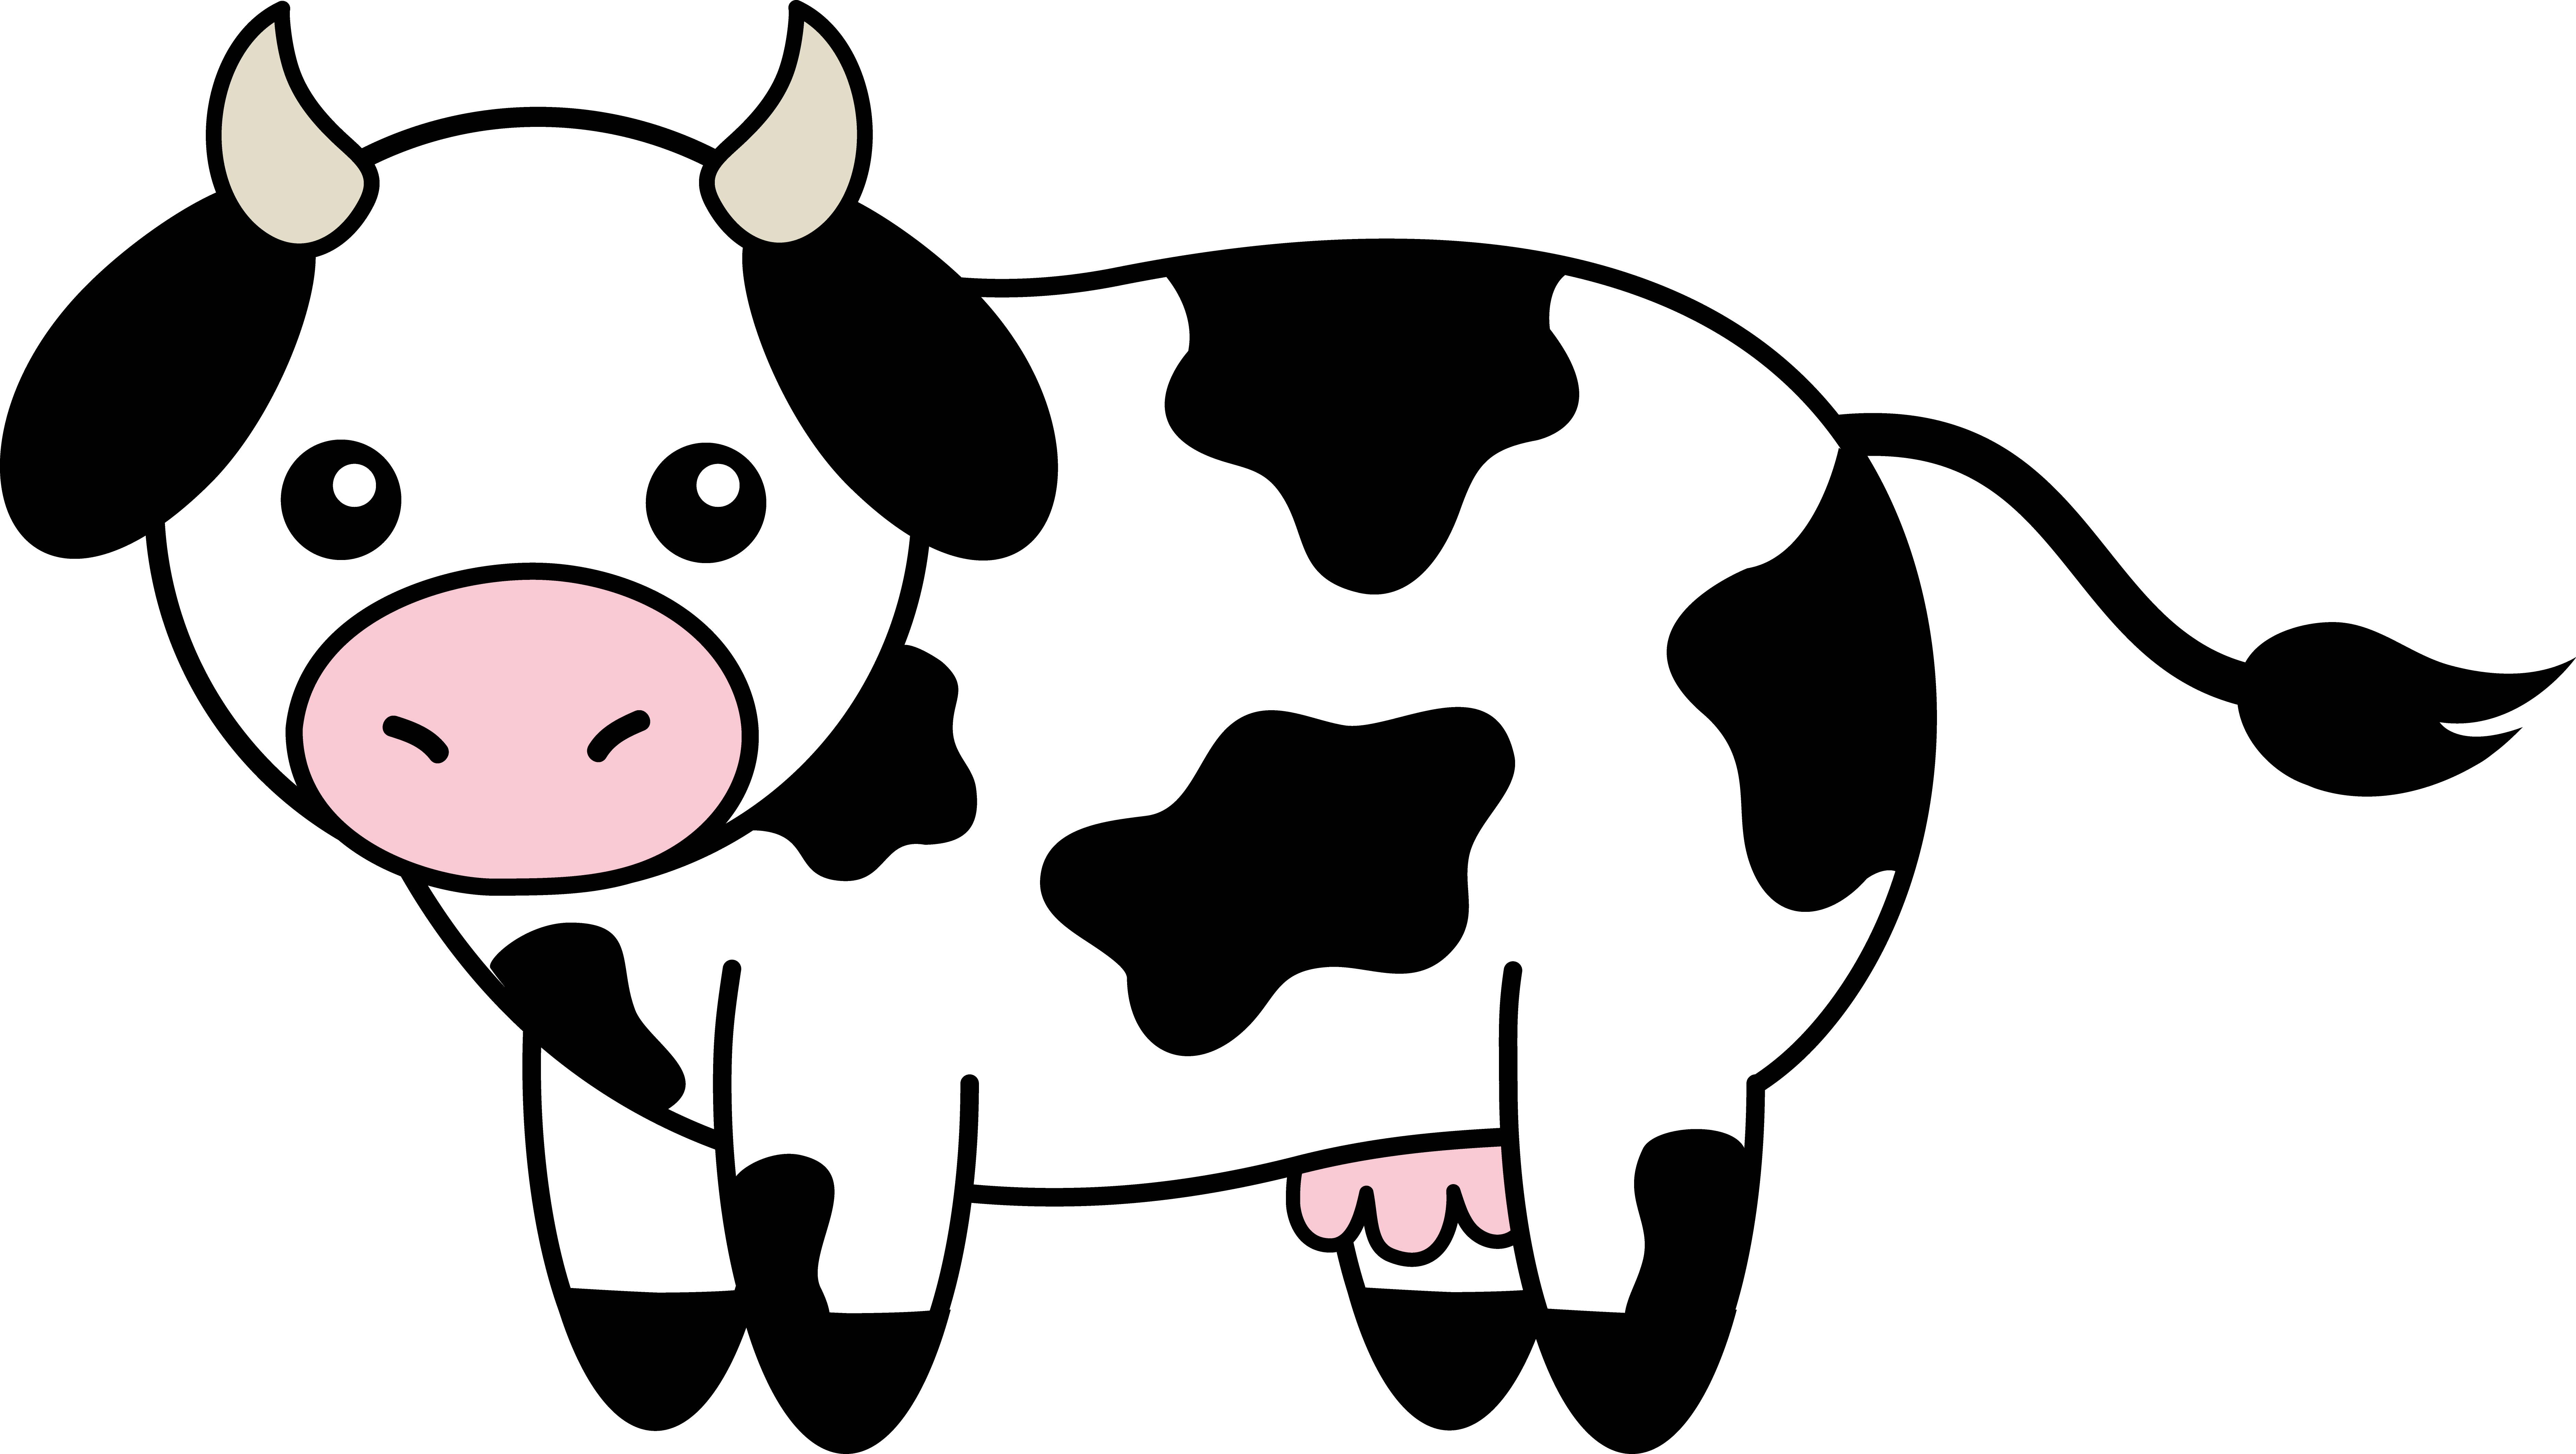 Cow Cartoon PNG Image